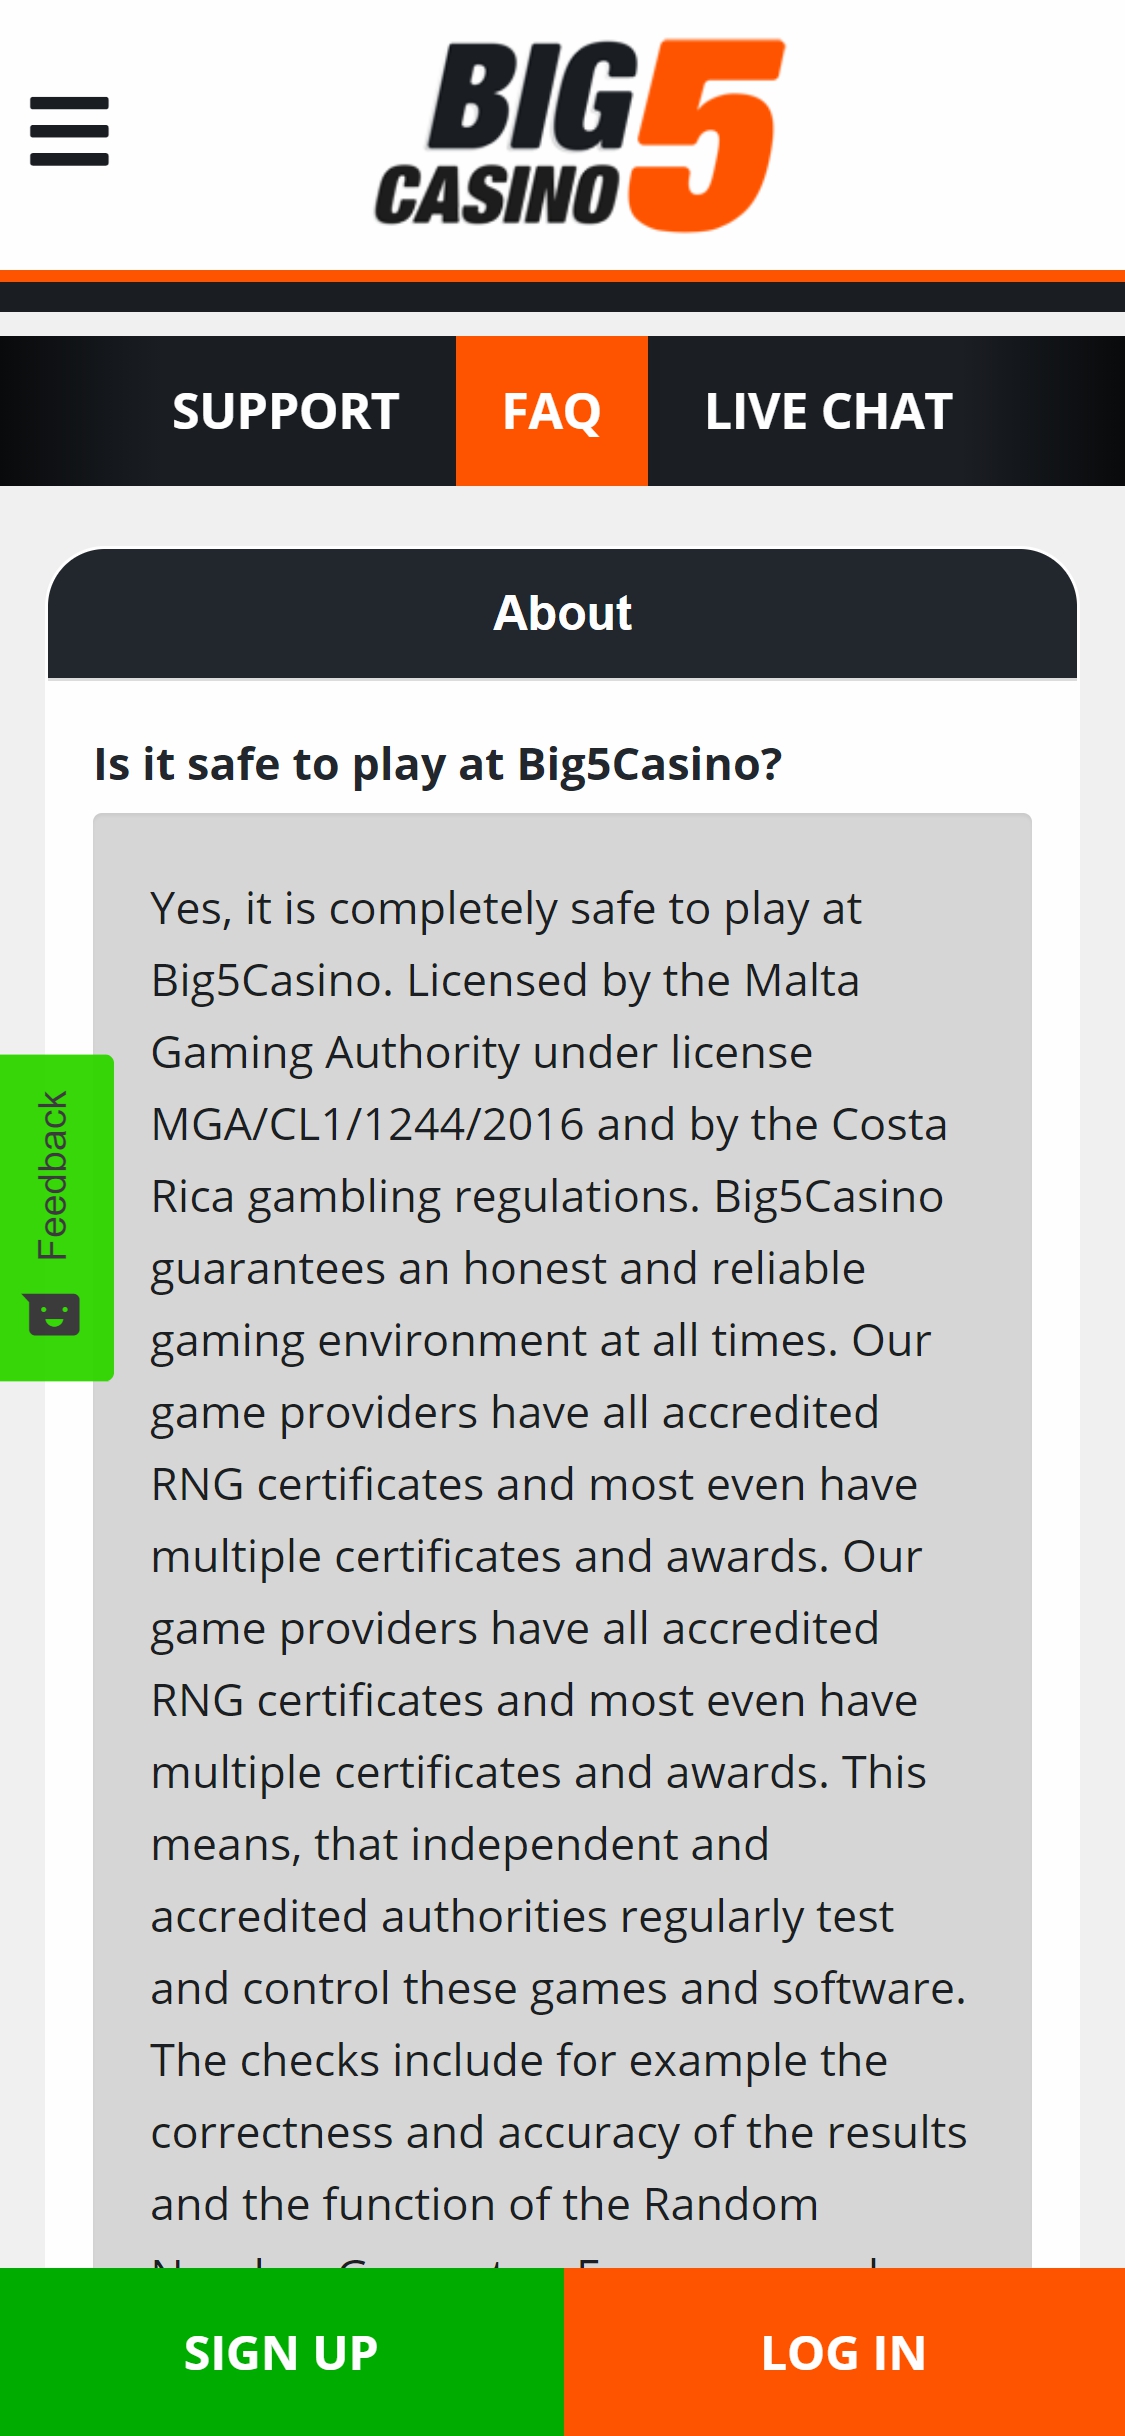 Big 5 Casino Mobile Support Review